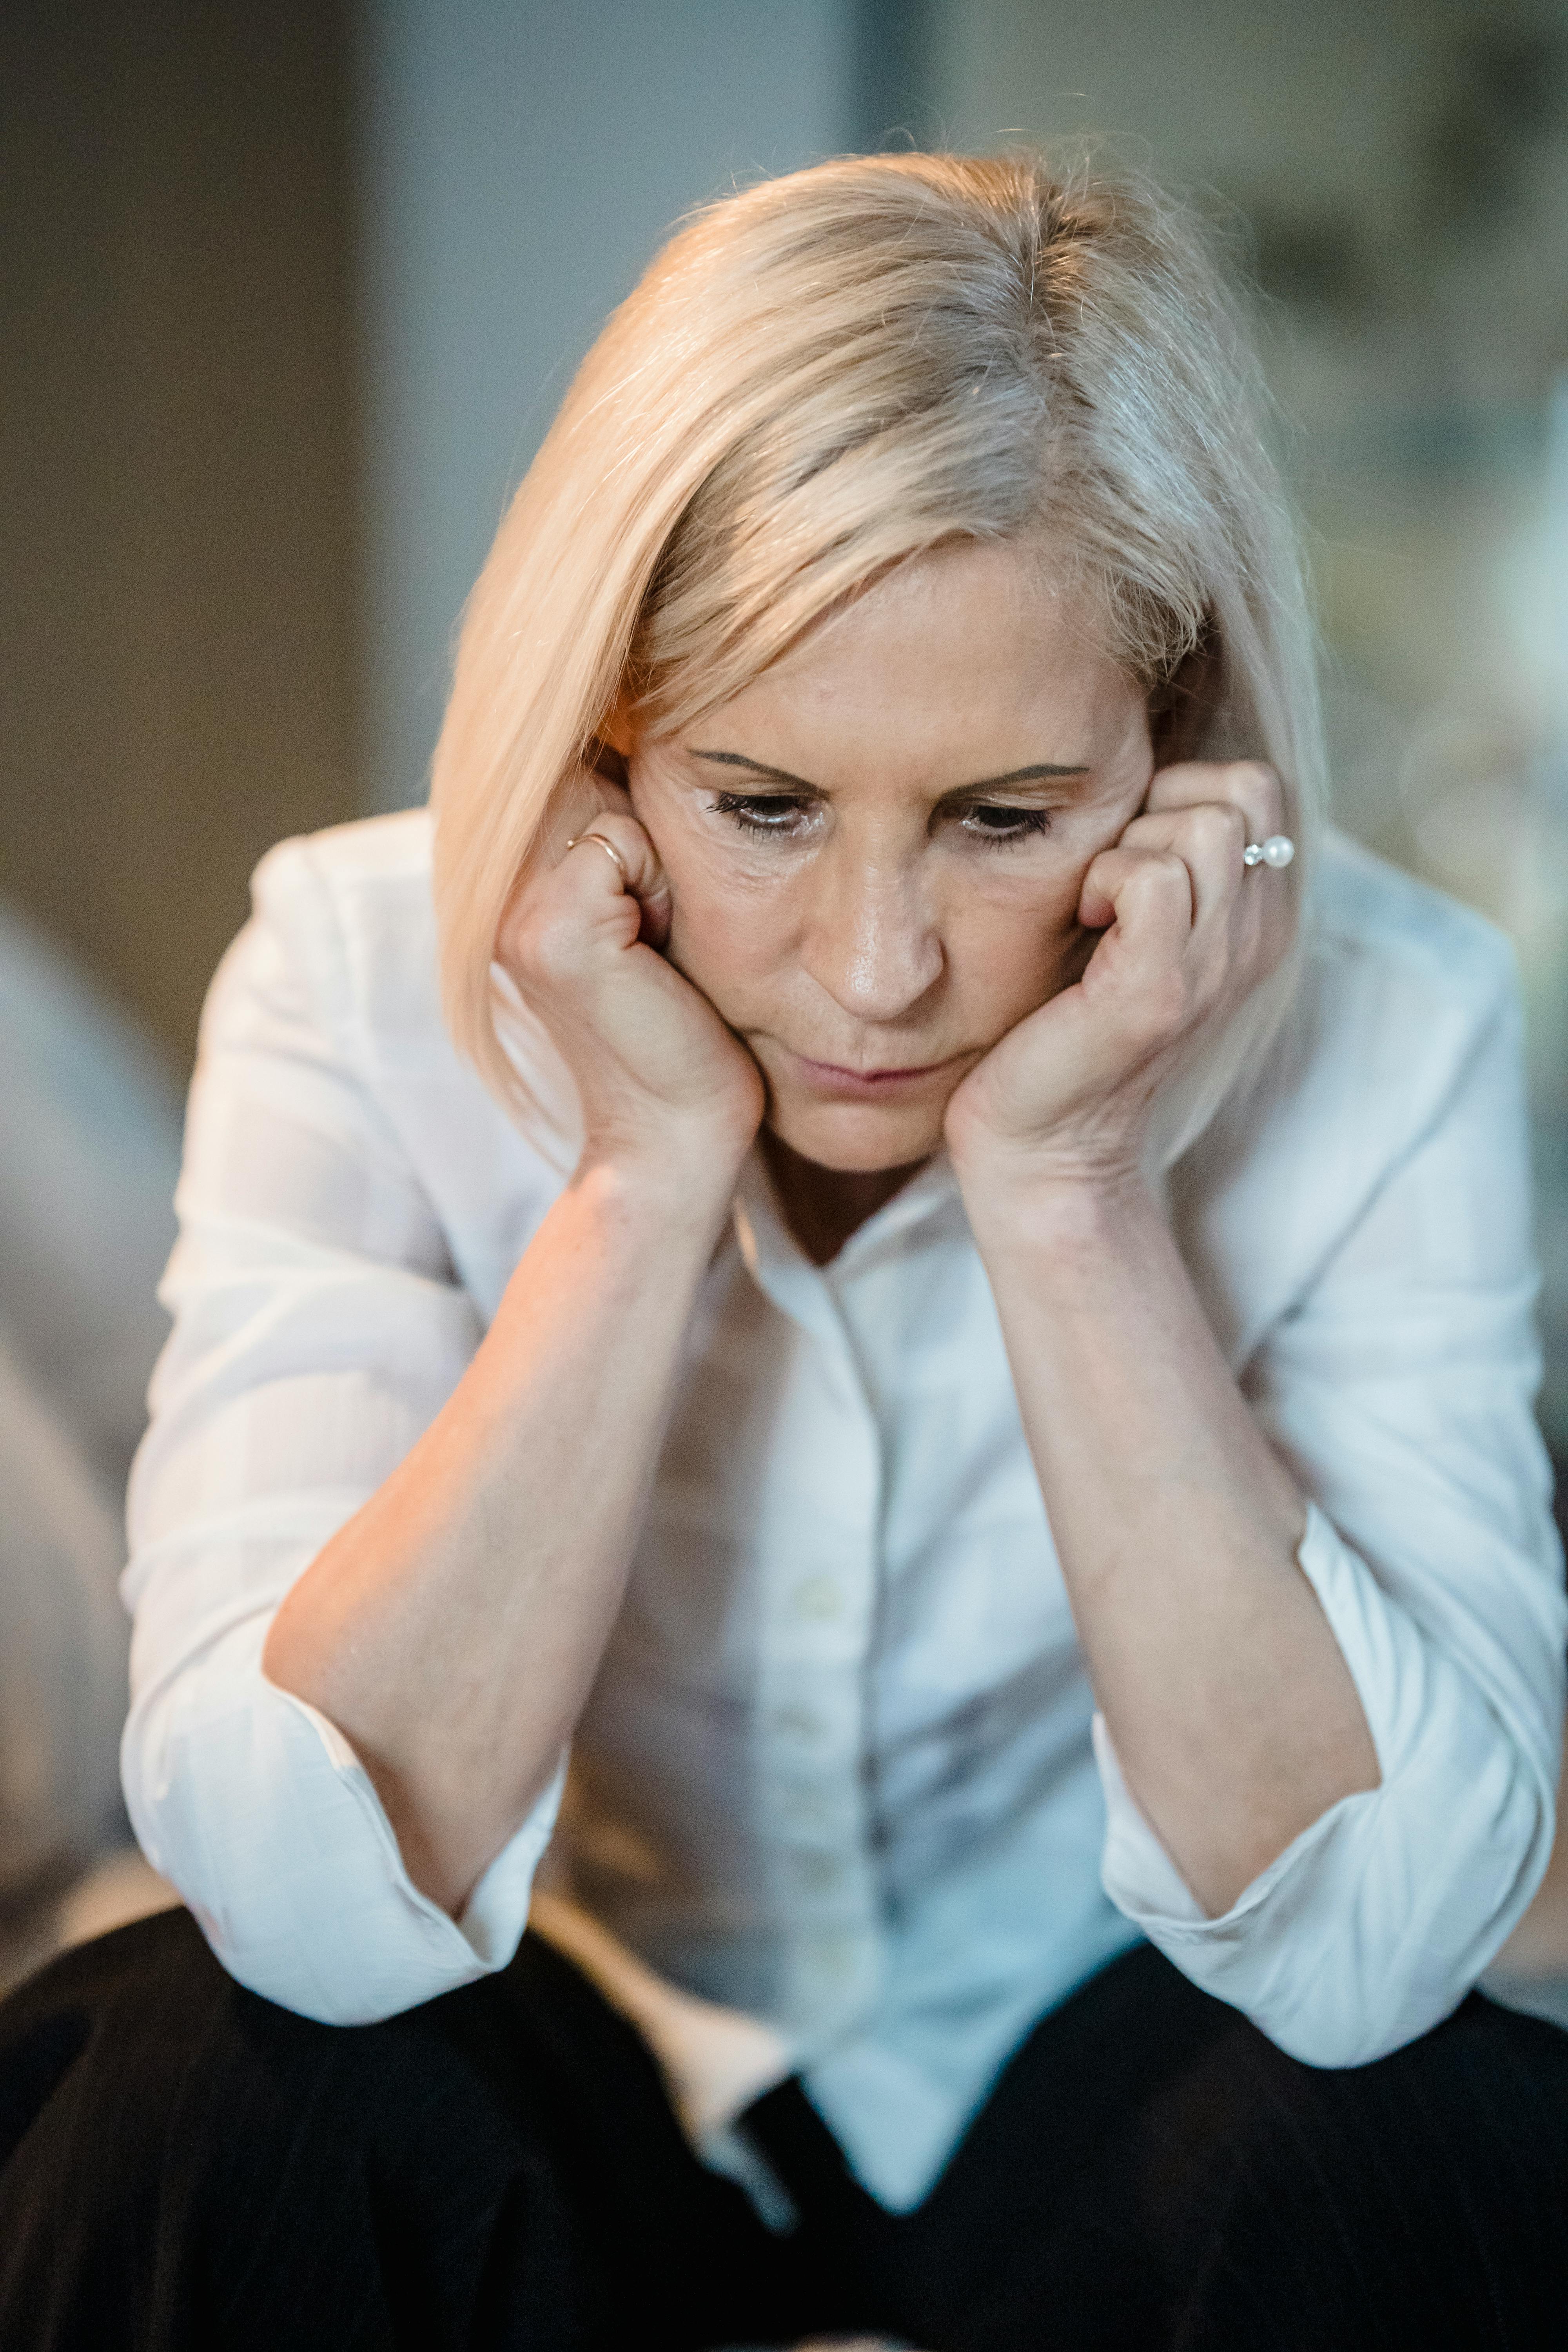 An upset older woman sitting looking down with her hands on her cheeks | Source: Pexels